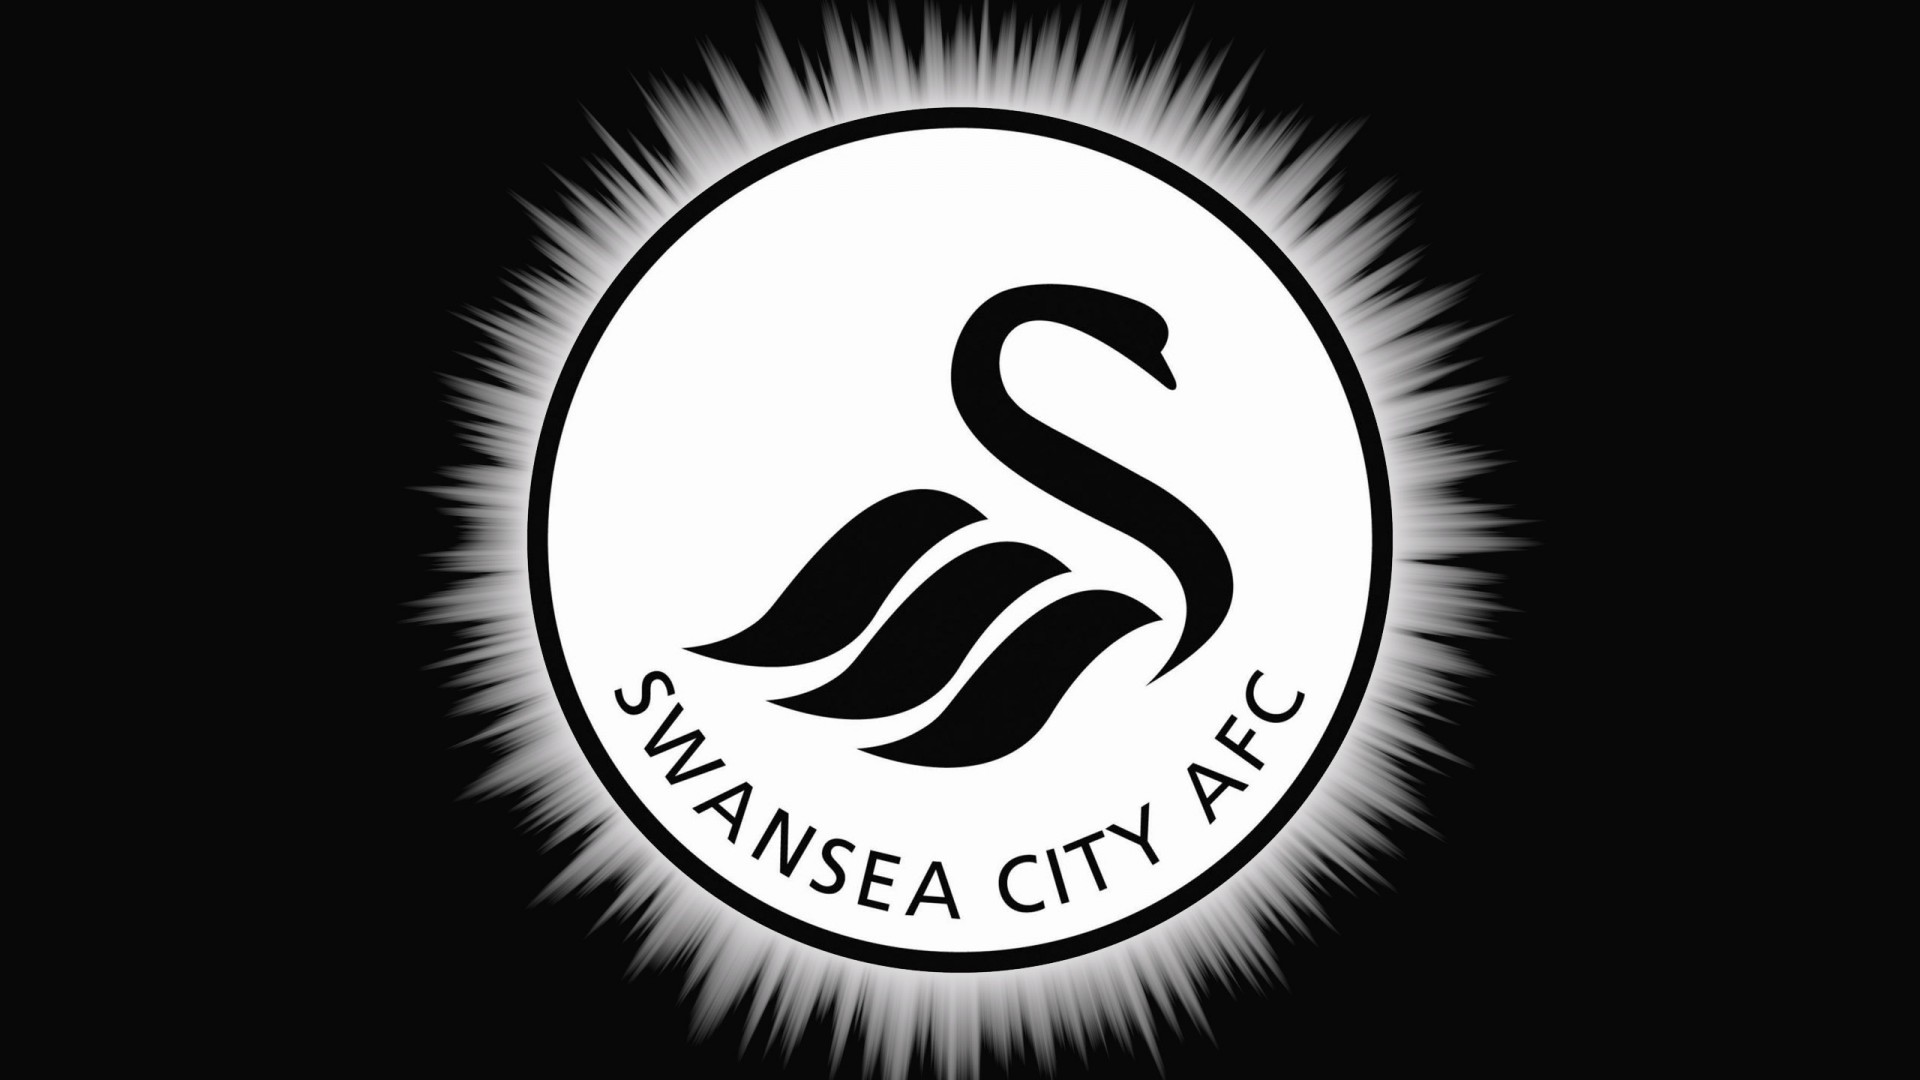 Swansea City FC Wallpaper and Windows 10 Theme | All for Windows ...